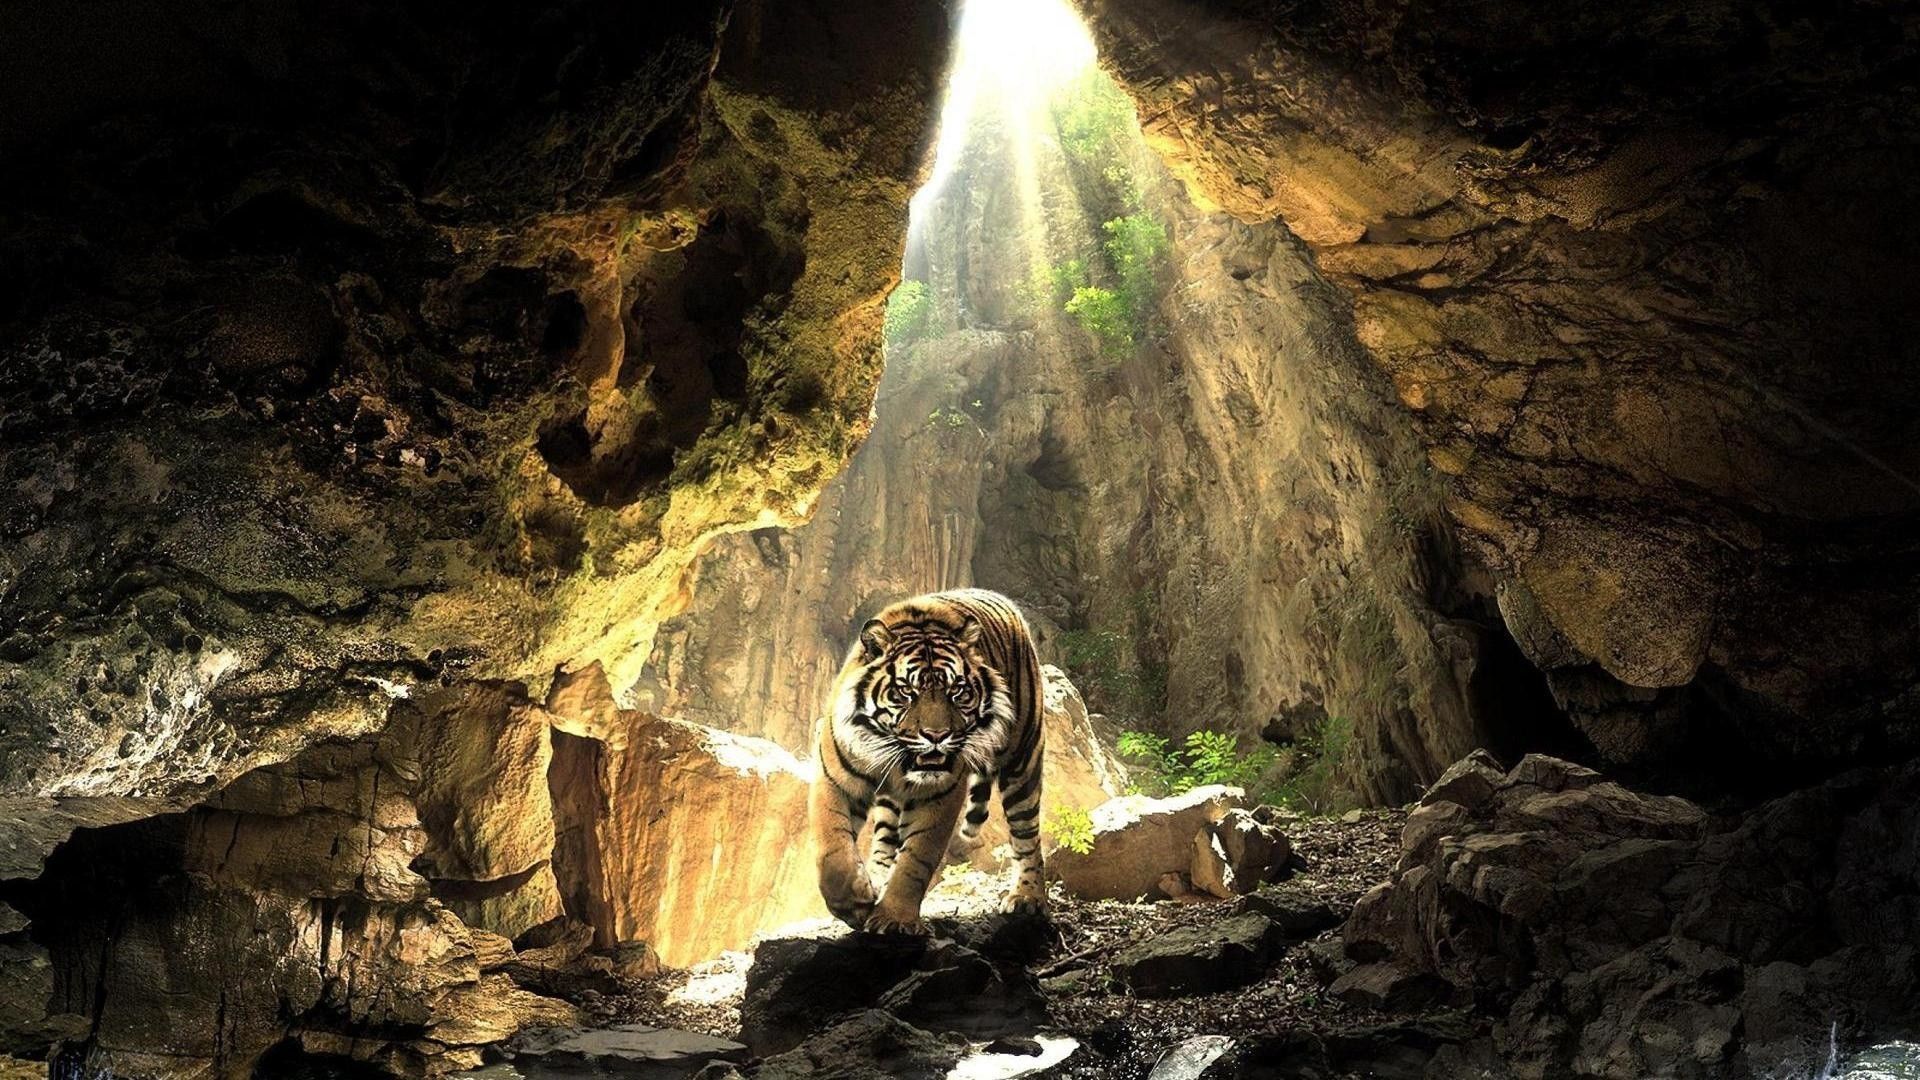 Wallpapers Of Tigers - Wallpaper Cave